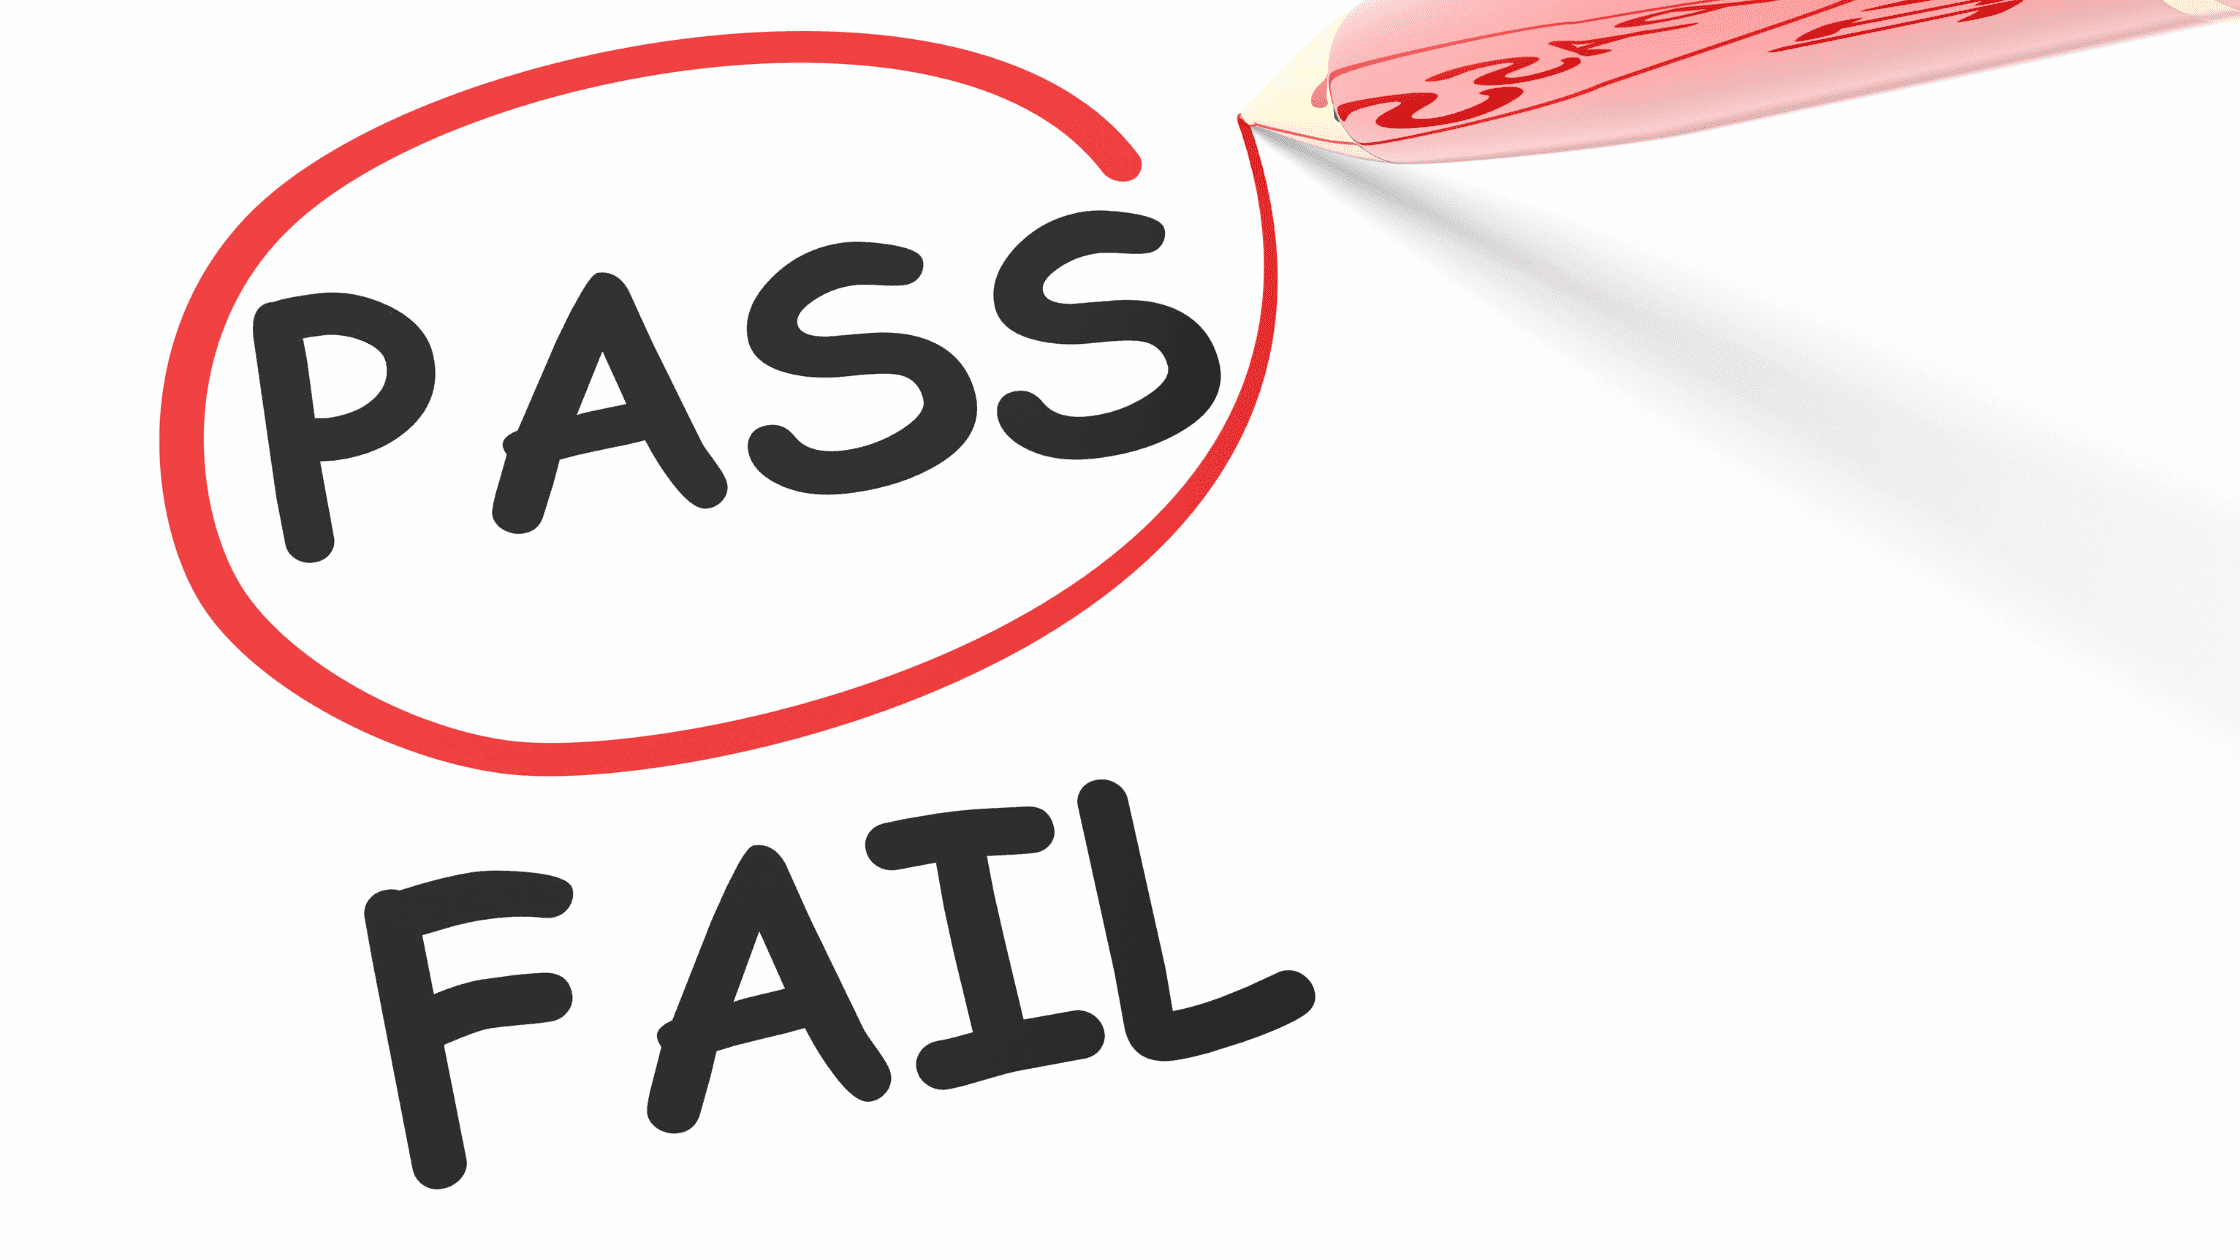 A Pass/Fail COMLEX Level 1 form with the word "Pass" circled.